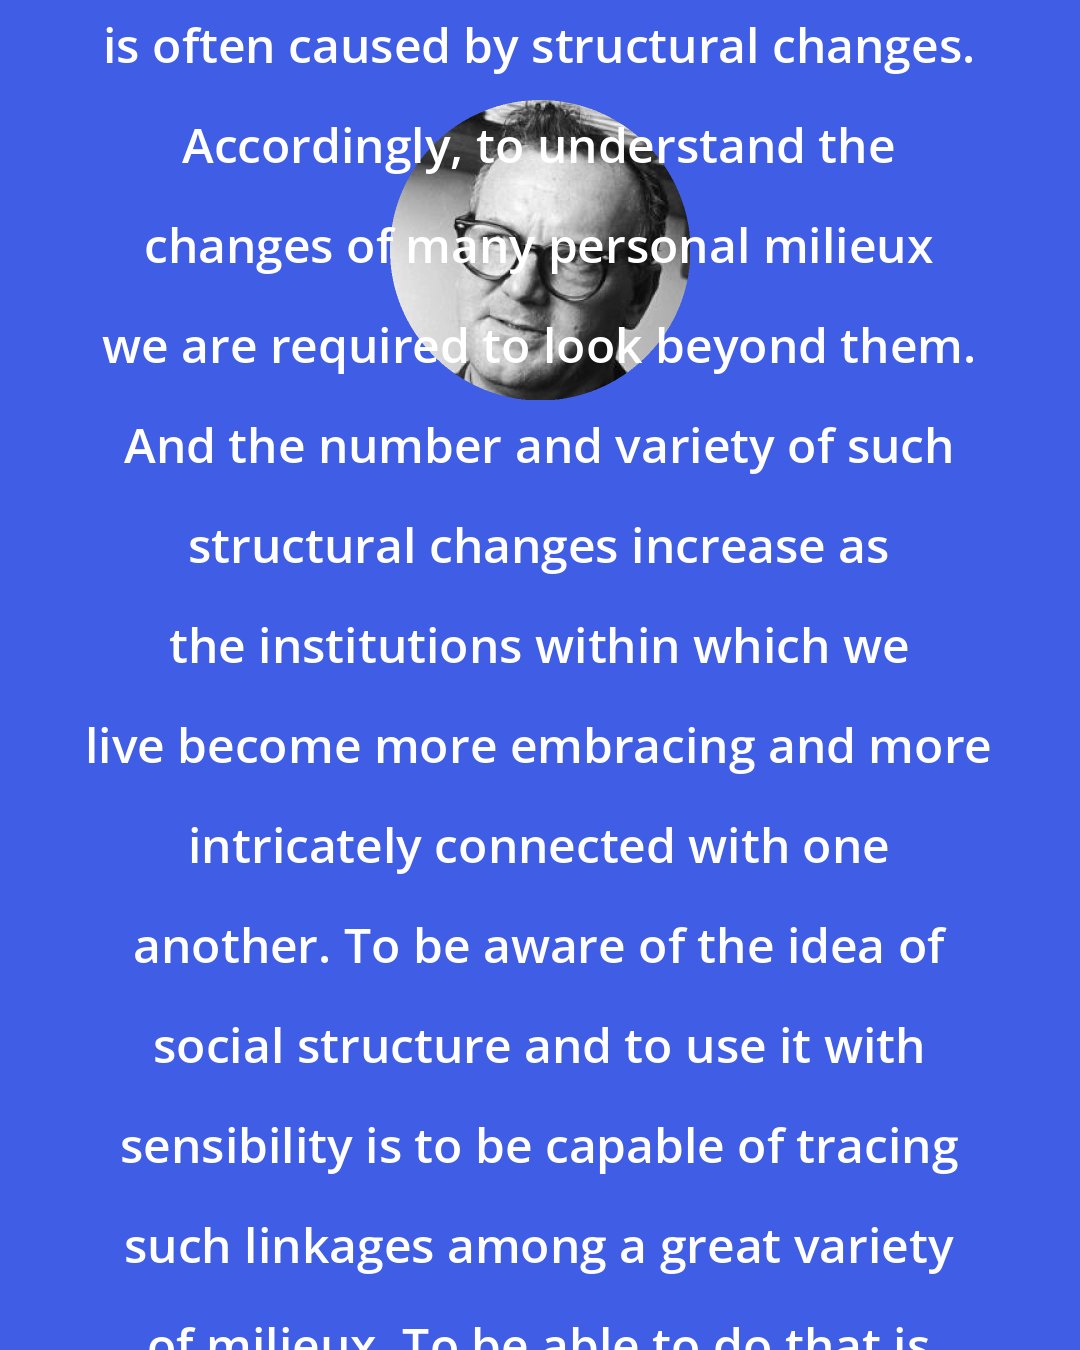 C. Wright Mills: What we experience in various and specific milieux, I have noted, is often caused by structural changes. Accordingly, to understand the changes of many personal milieux we are required to look beyond them. And the number and variety of such structural changes increase as the institutions within which we live become more embracing and more intricately connected with one another. To be aware of the idea of social structure and to use it with sensibility is to be capable of tracing such linkages among a great variety of milieux. To be able to do that is to possess the sociological imagination